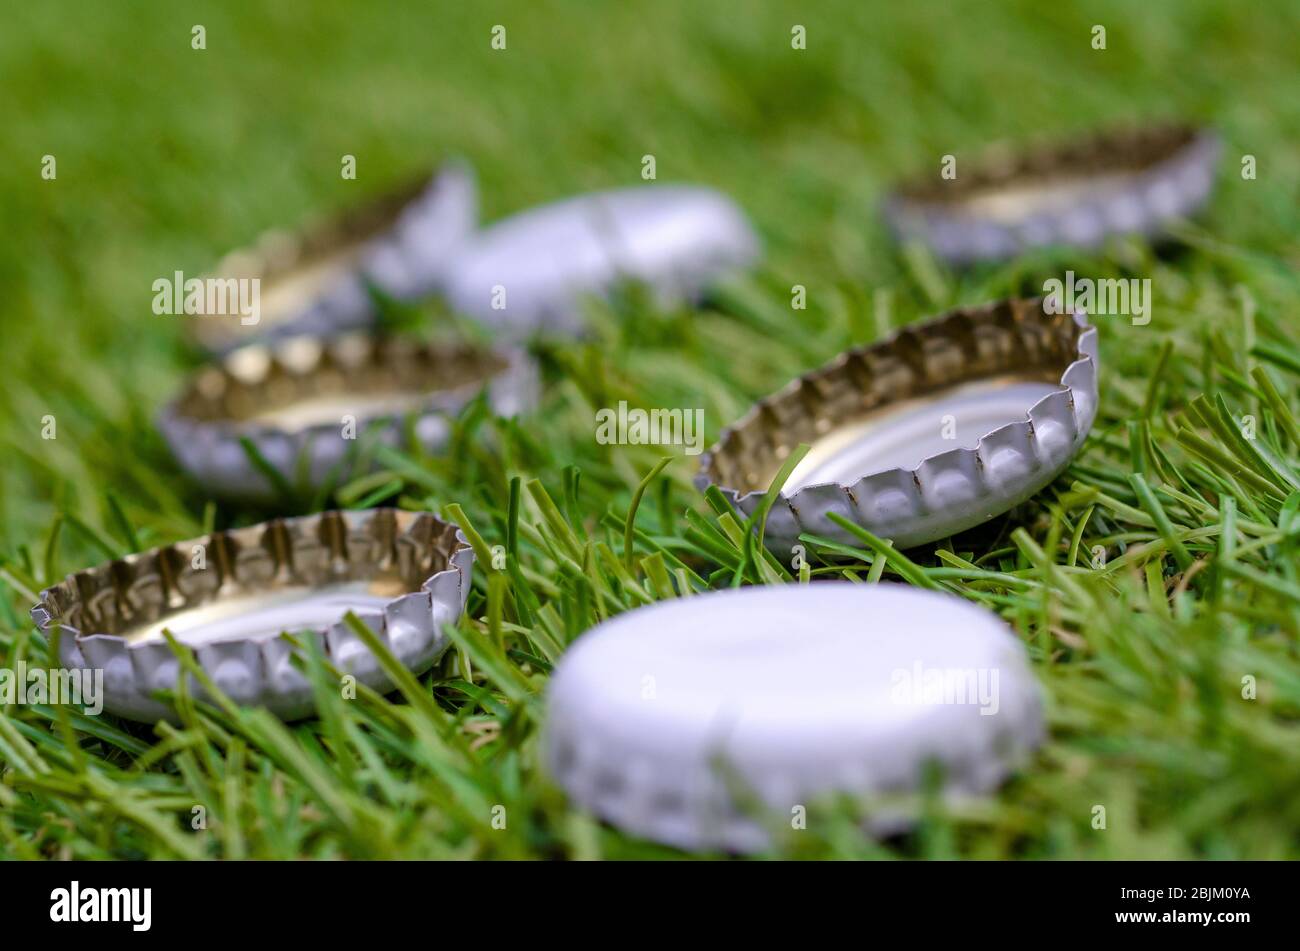 Pile of Discarded Beer Bottle Tops on Grass Stock Photo